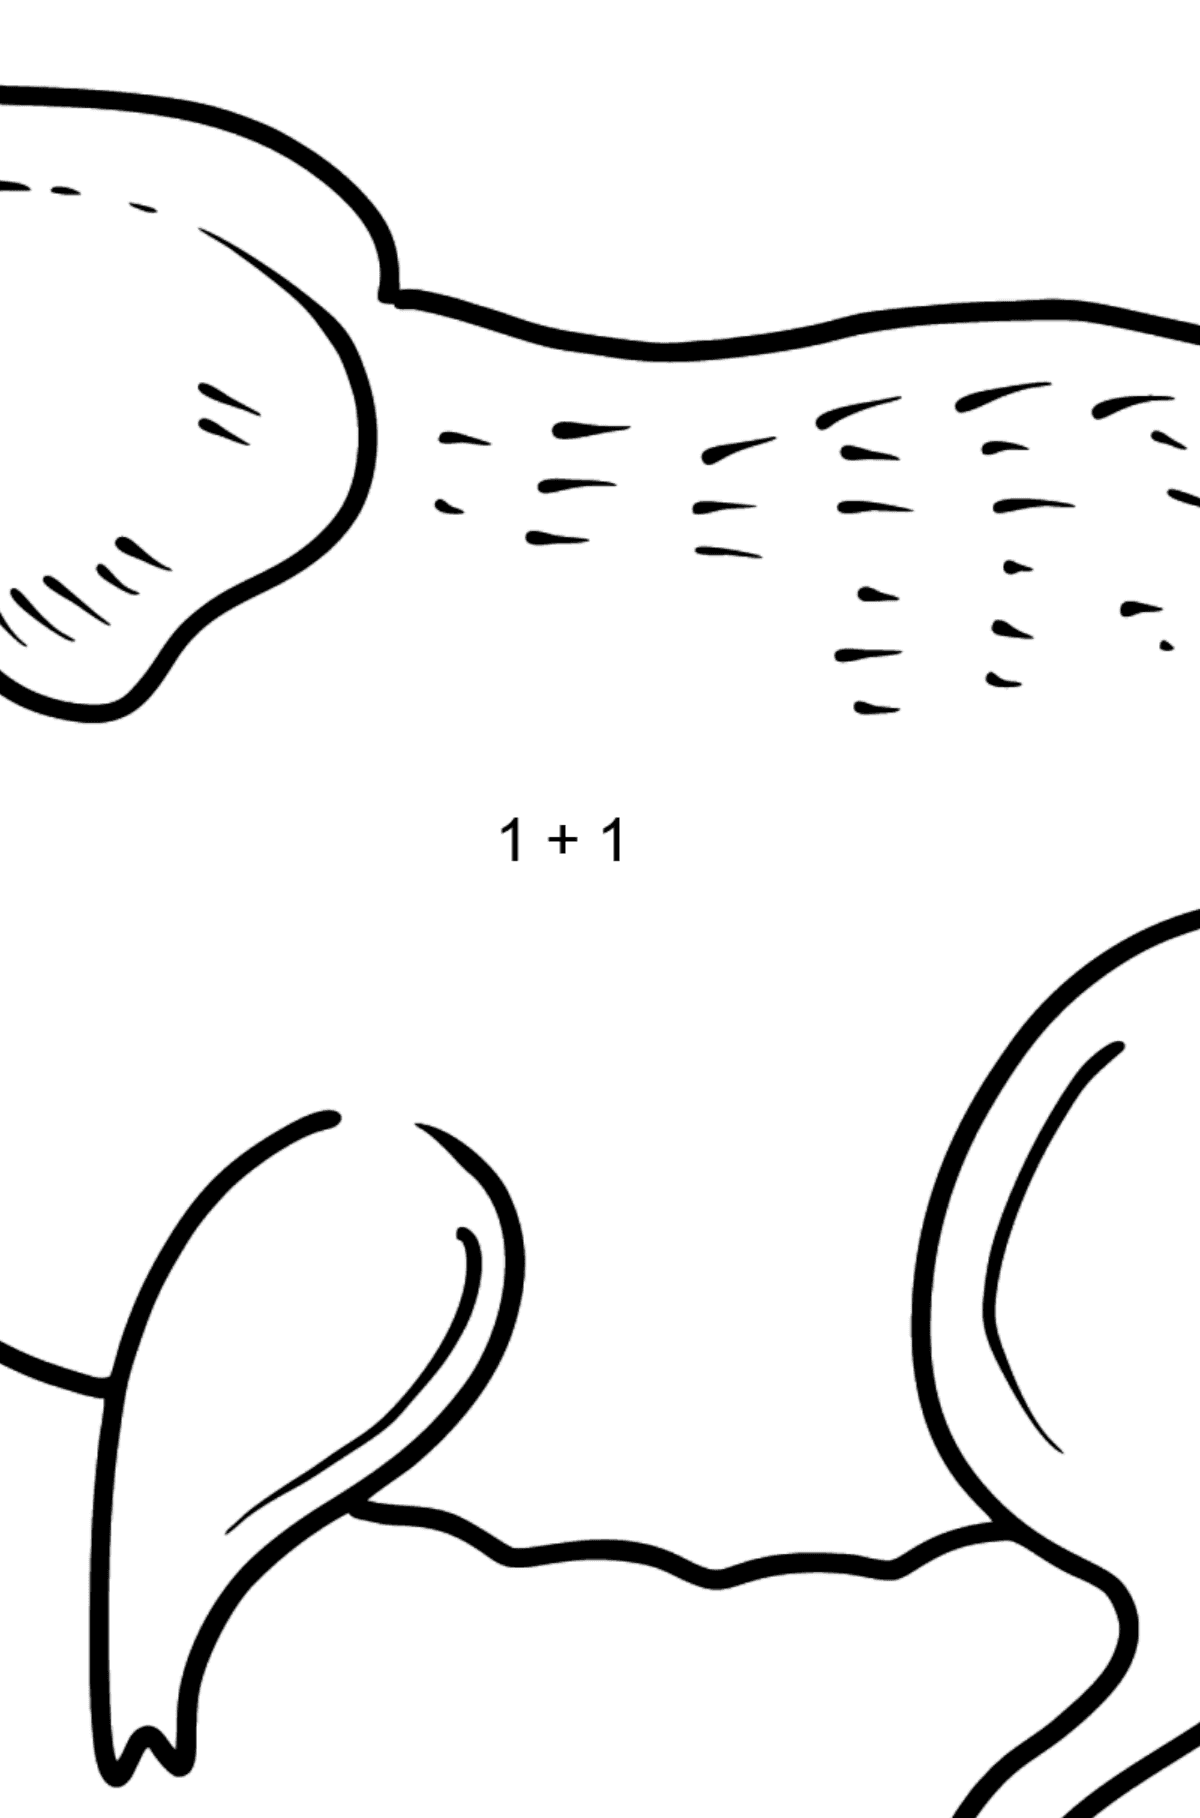 Pig coloring page - Math Coloring - Addition for Kids